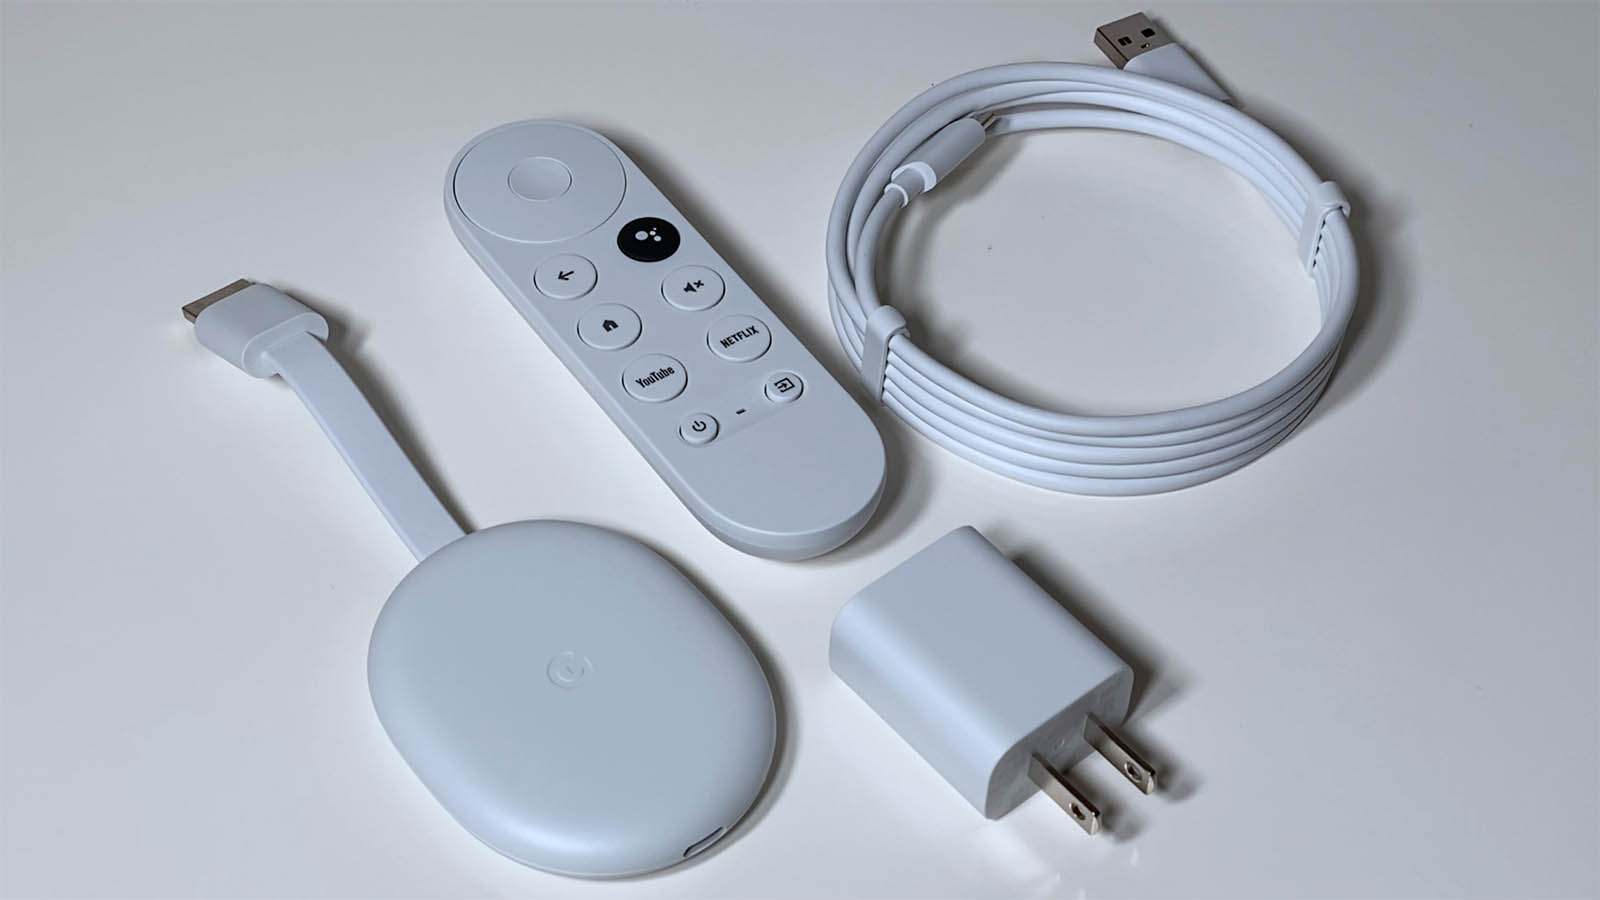 del Sidst Direkte Deal Alert! Chromecast With Google TV 4K is On Sale | Cord Cutters News